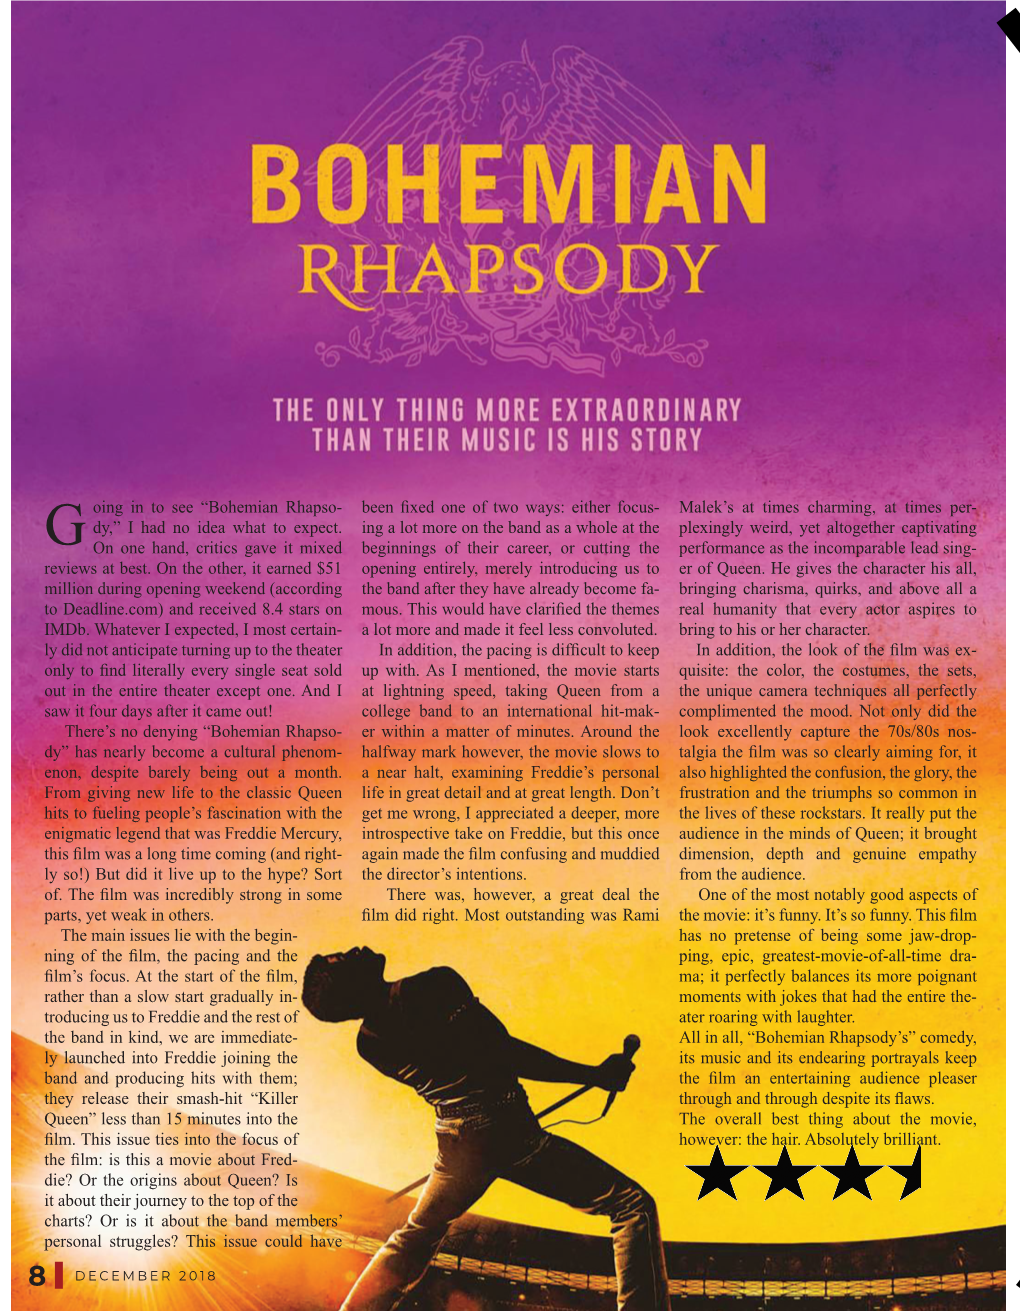 Oing in to See “Bohemian Rhapso- Dy,” I Had No Idea What to Expect